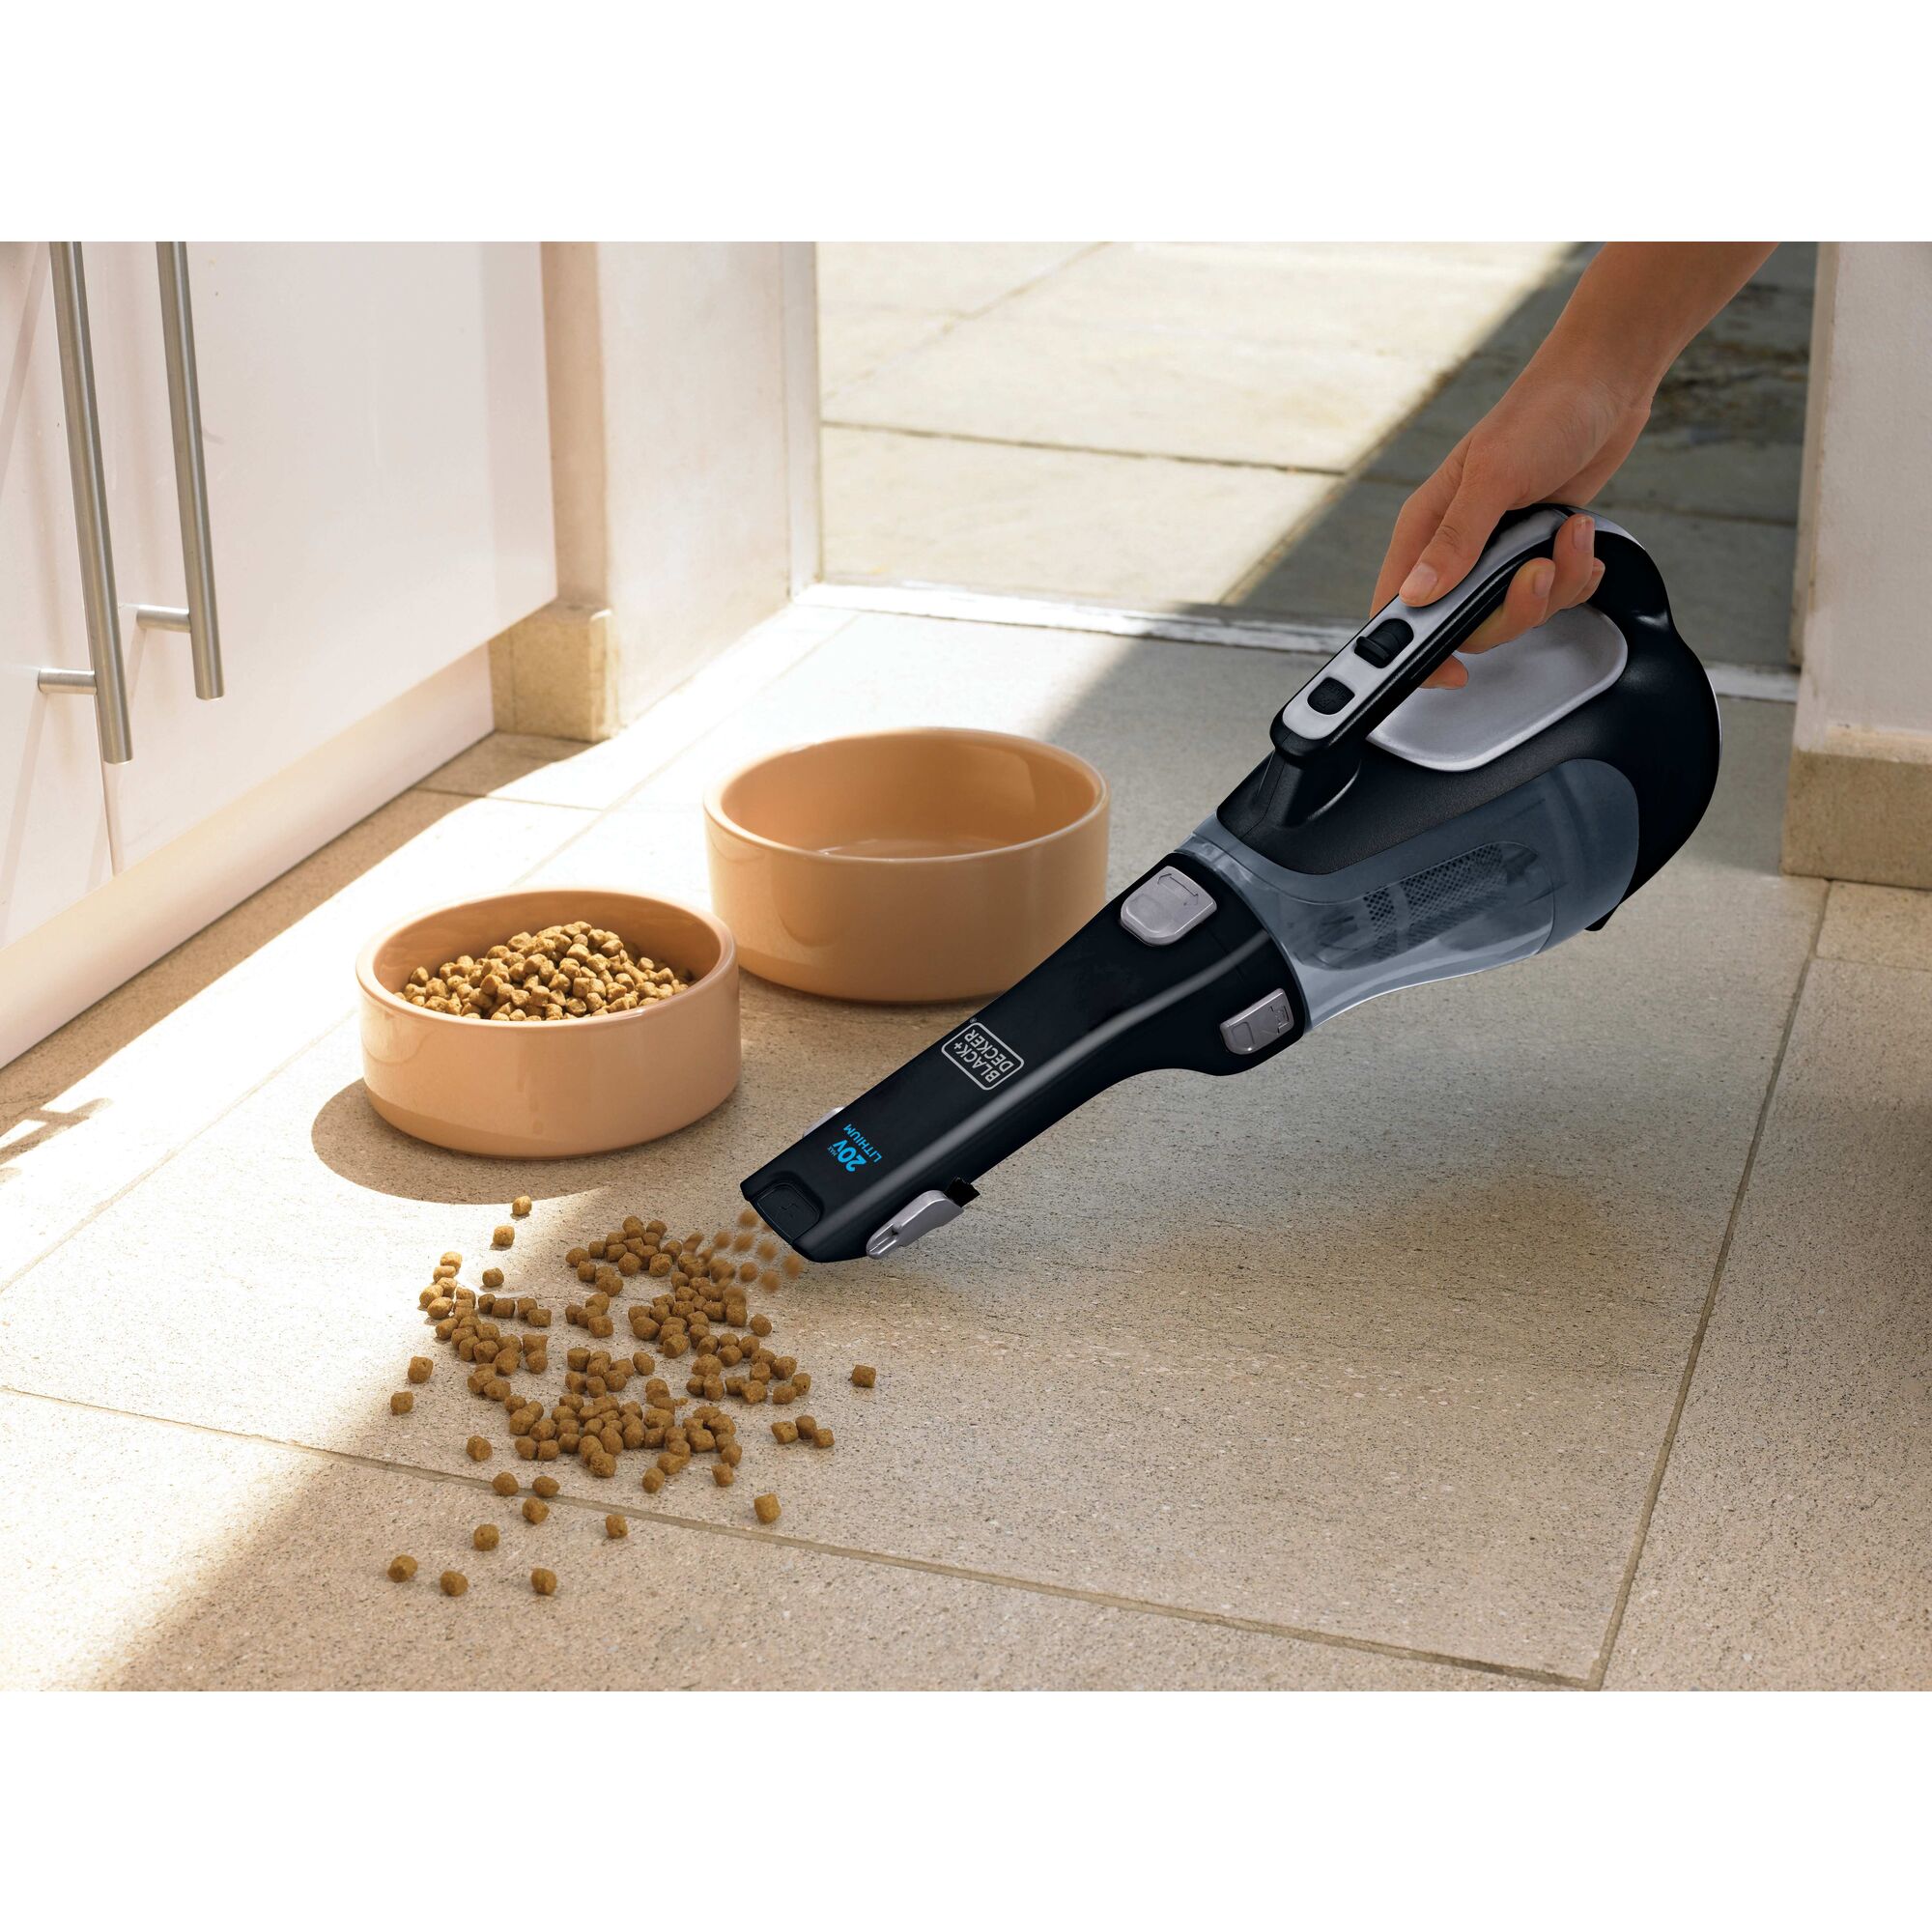 Dustbuster Cordless Hand Vacuum being used to clean pet food on a floor.